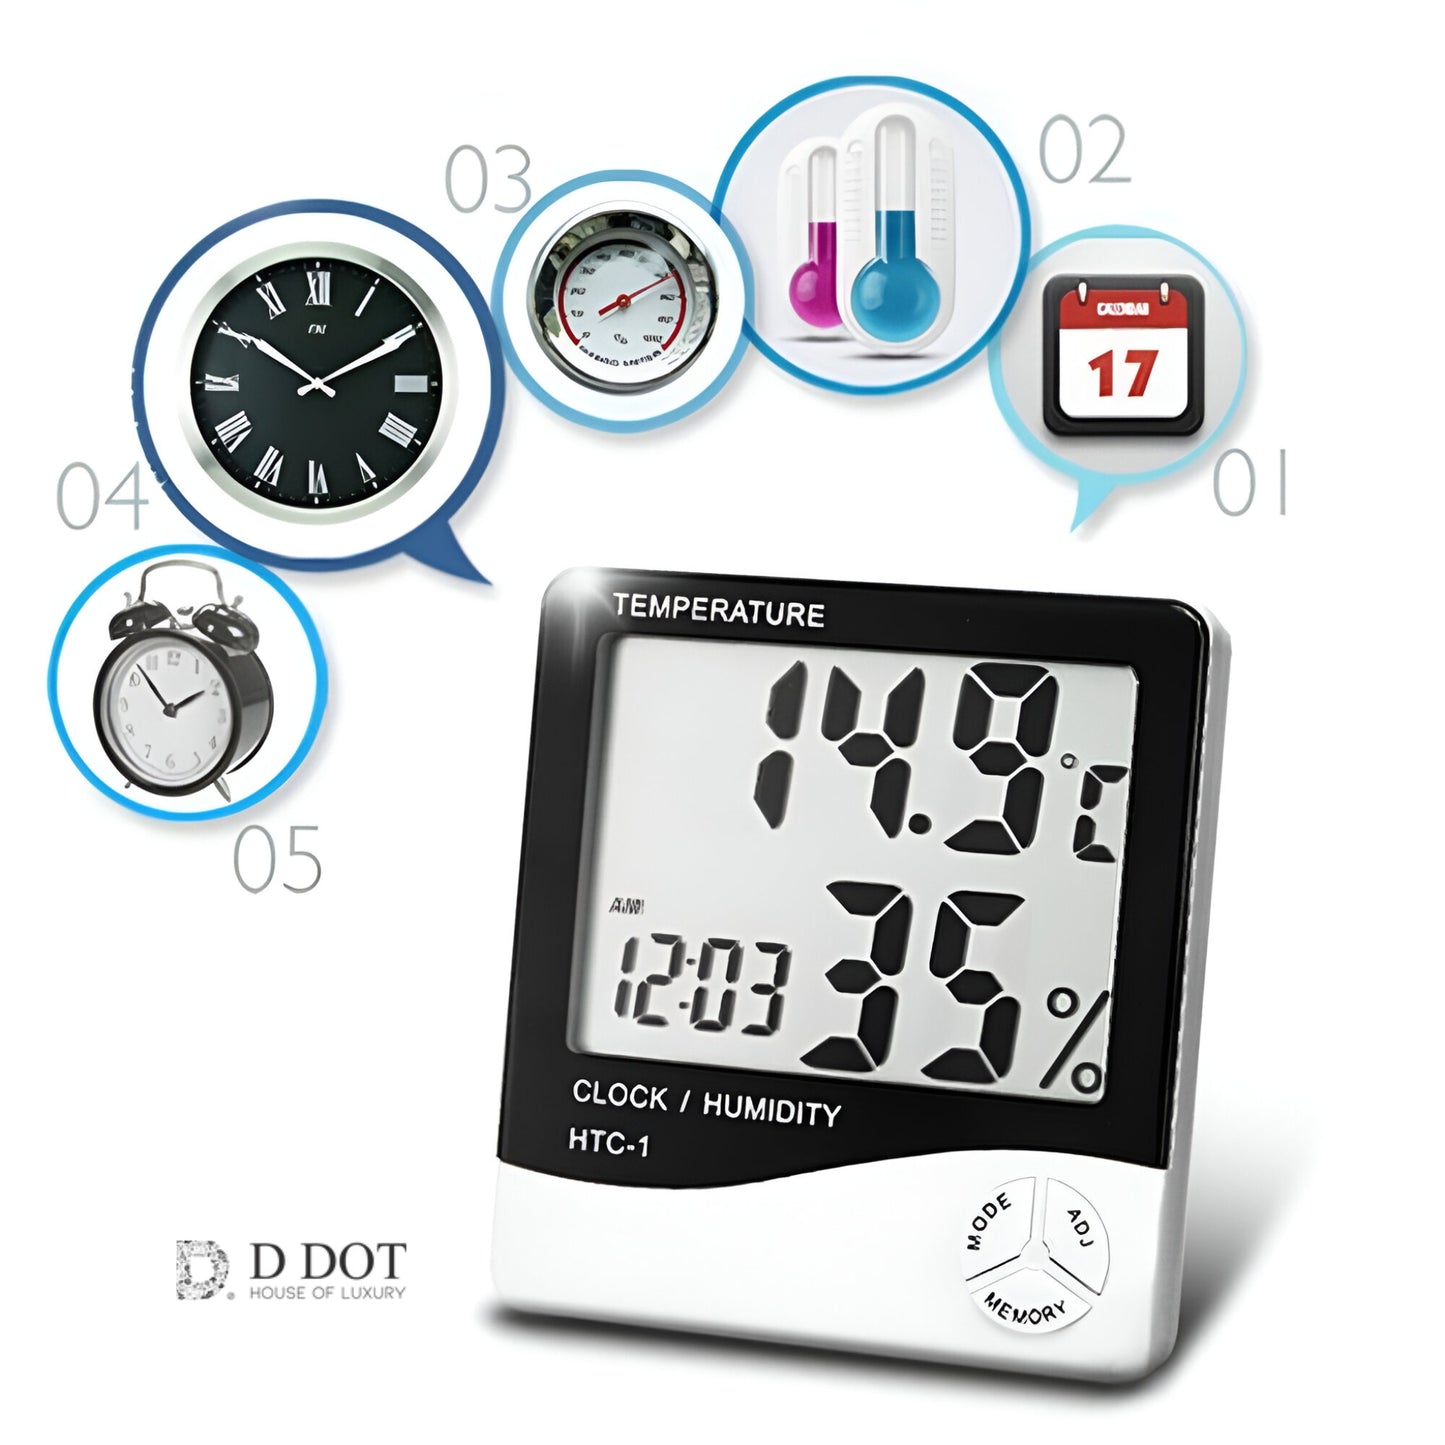 Monitor Your Indoor Climate with Temperature Humidity Time Display Meter - Alarm Clock Included